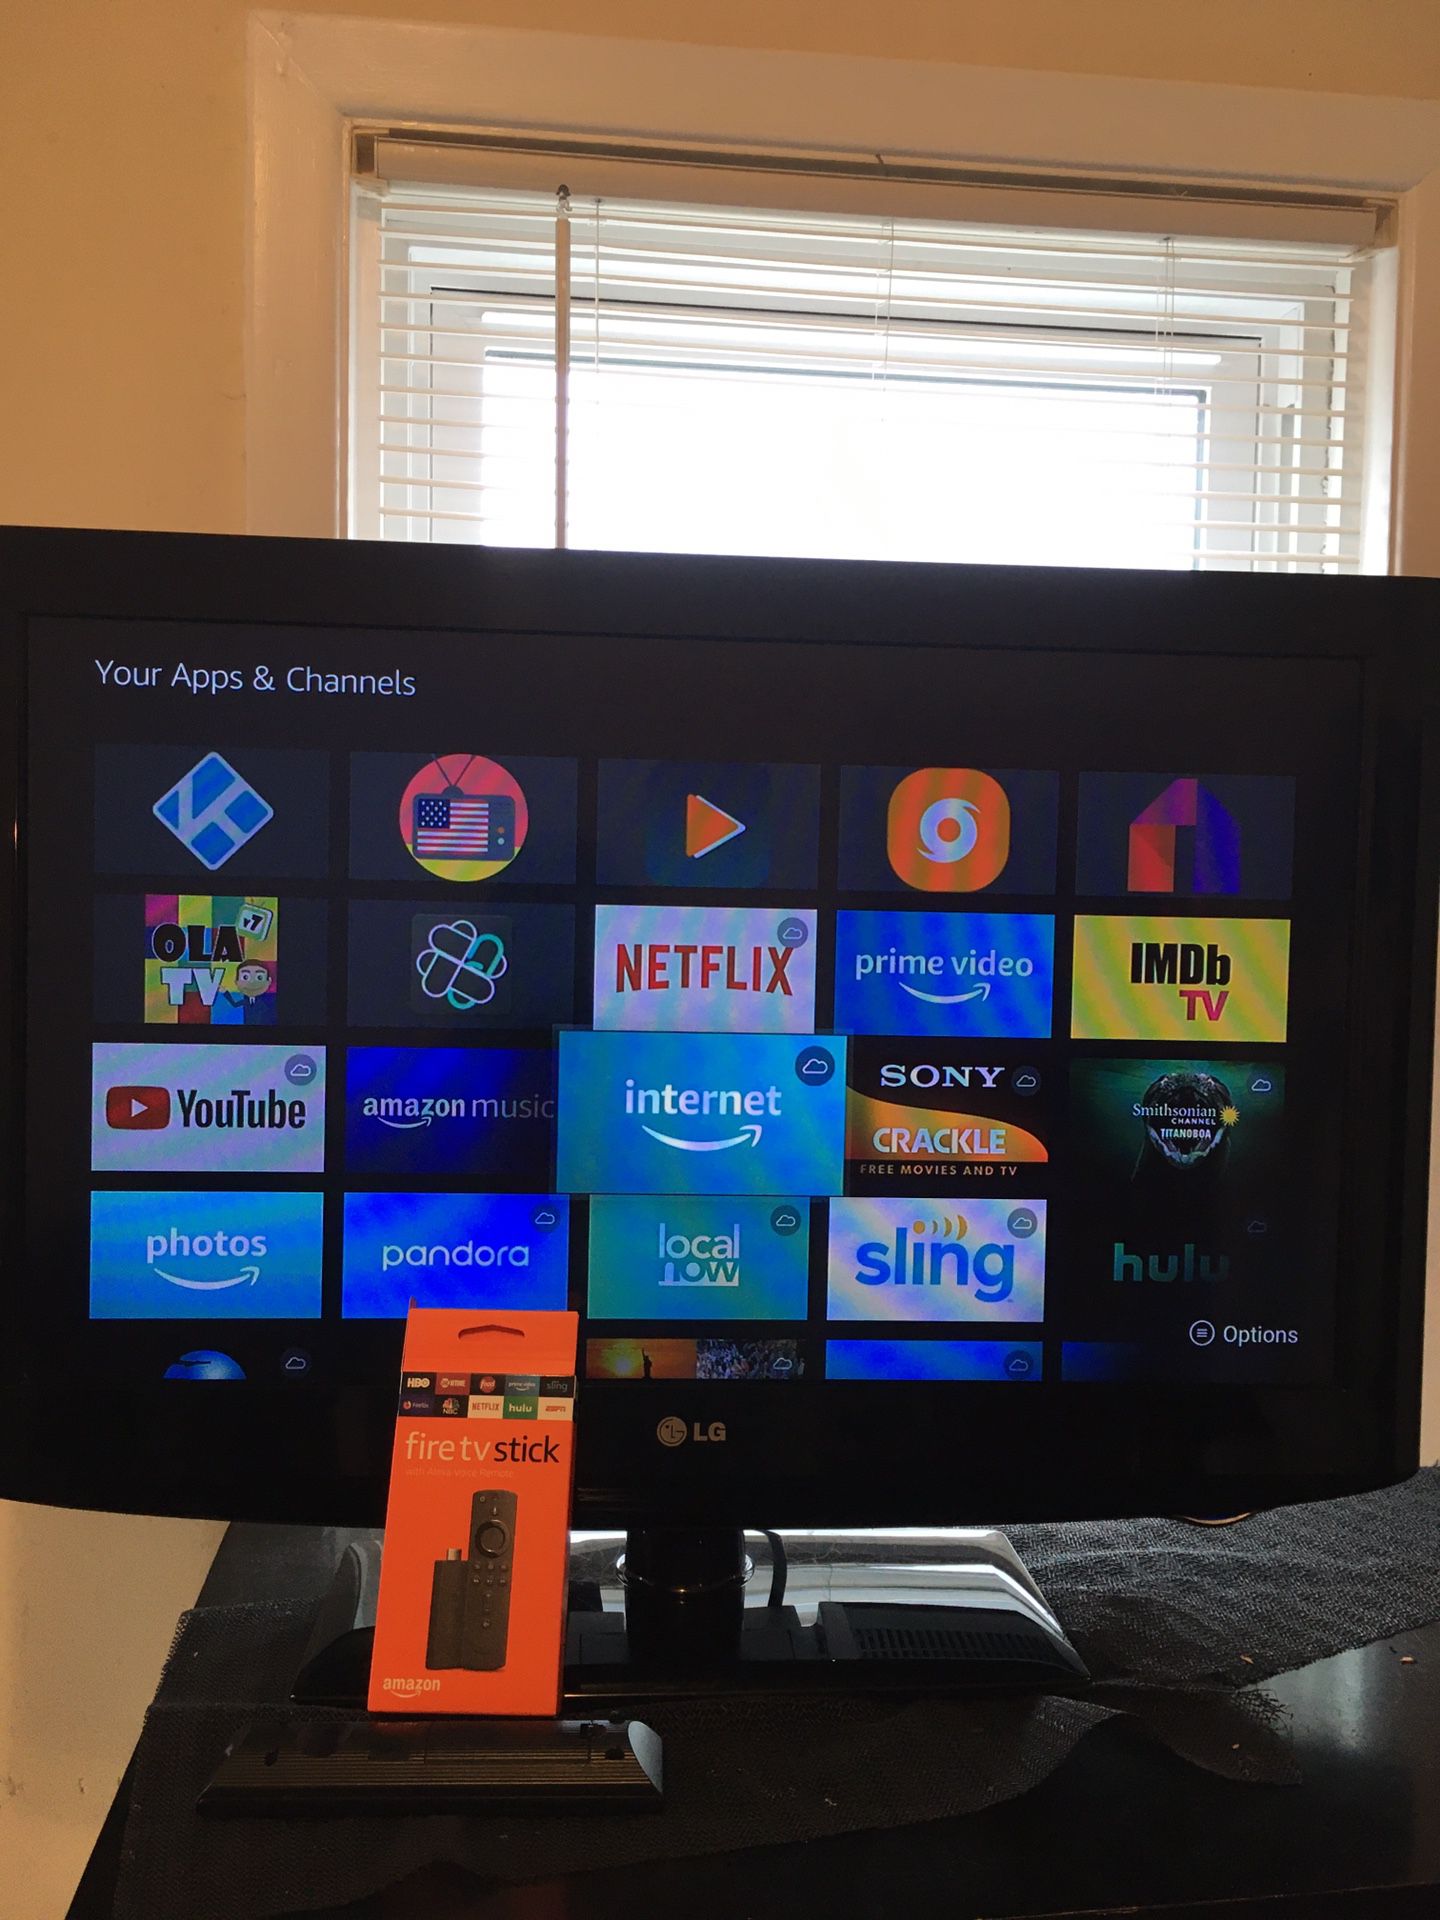 32” LG tv & Fire tv stick with